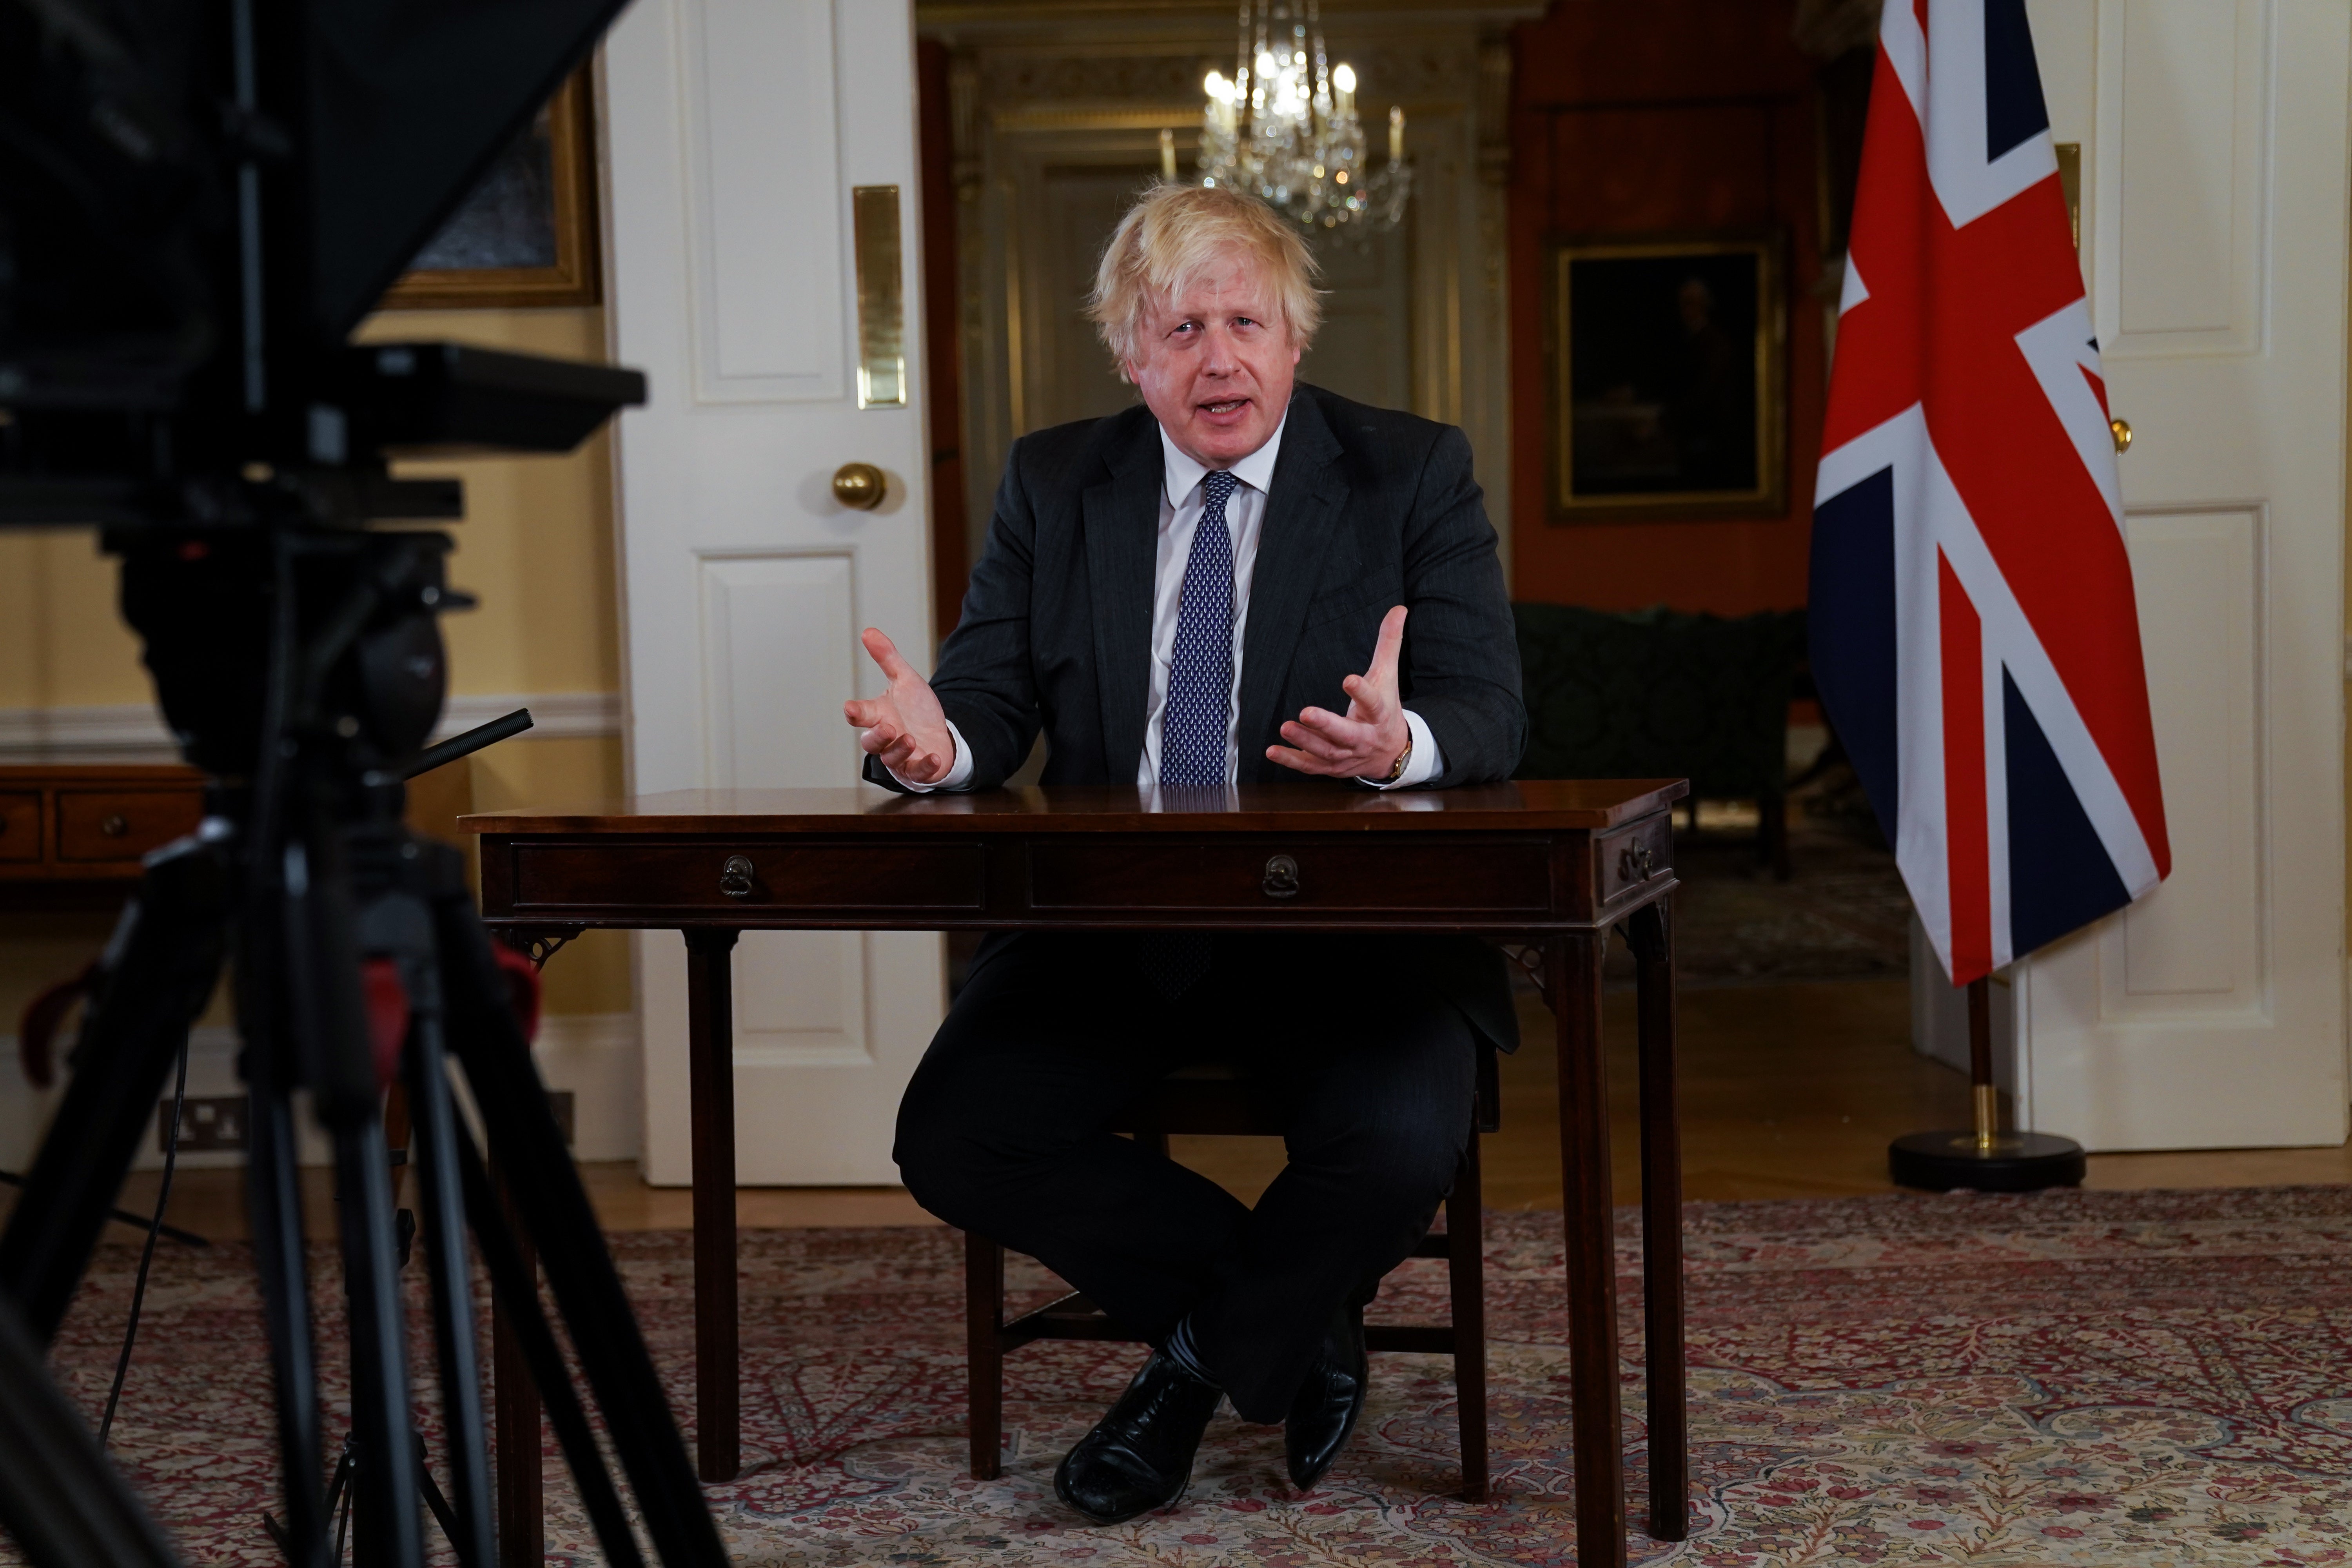 Prime Minister Boris Johnson, gestures as he records an address to the nation in Downing Street (Kirsty O’Connor/PA)